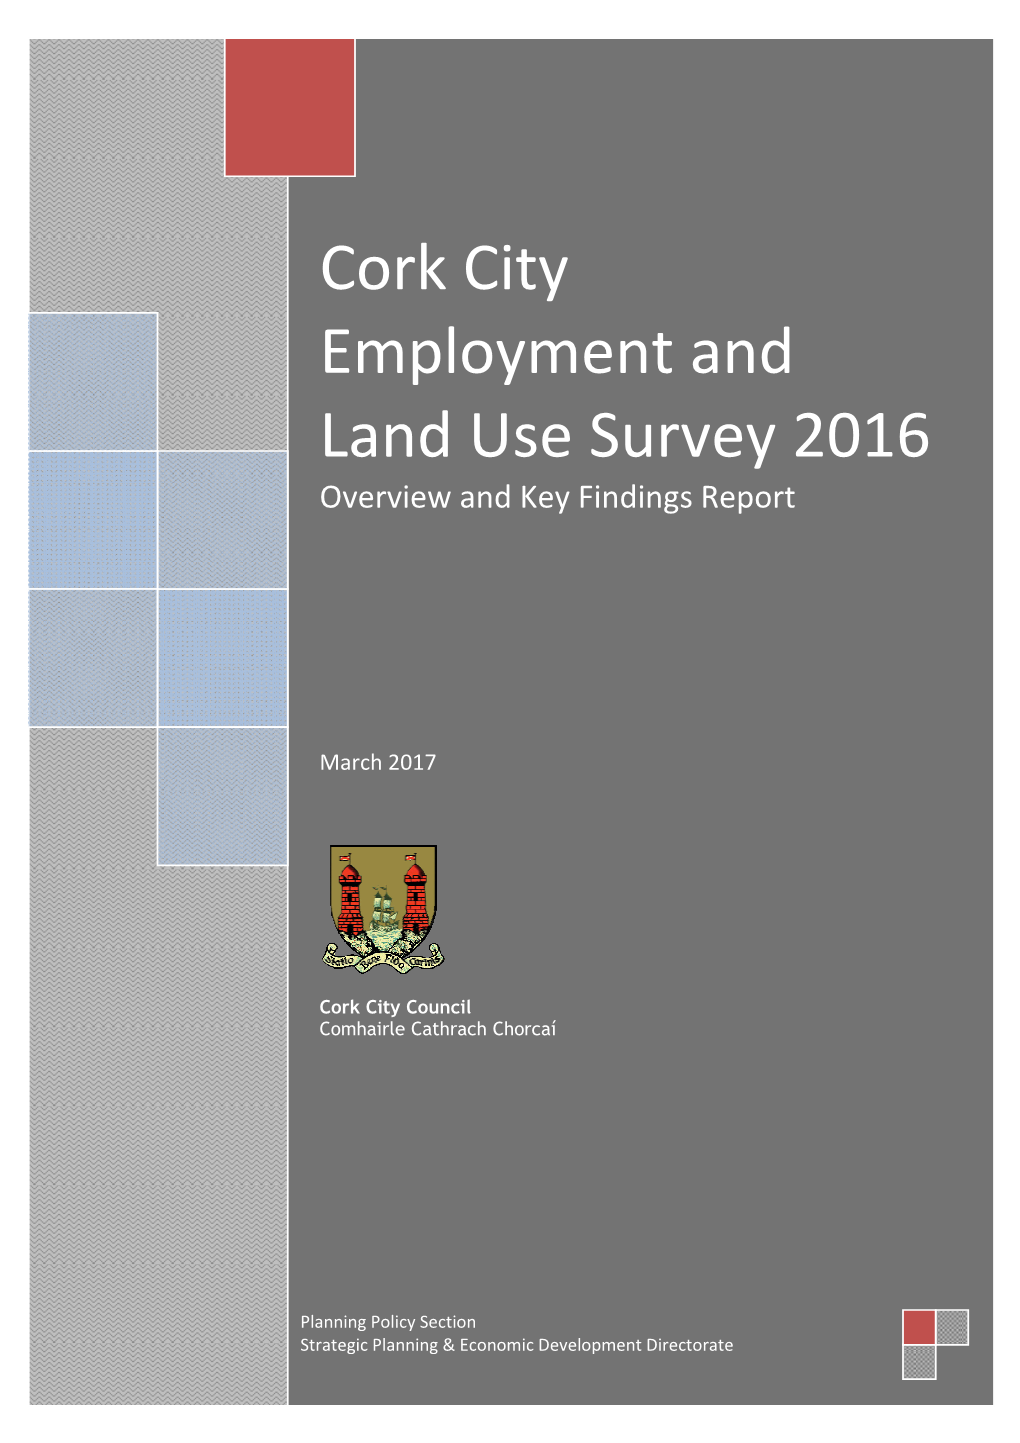 Cork City Employment and Land Use Survey 2016 Overview and Key Findings Report